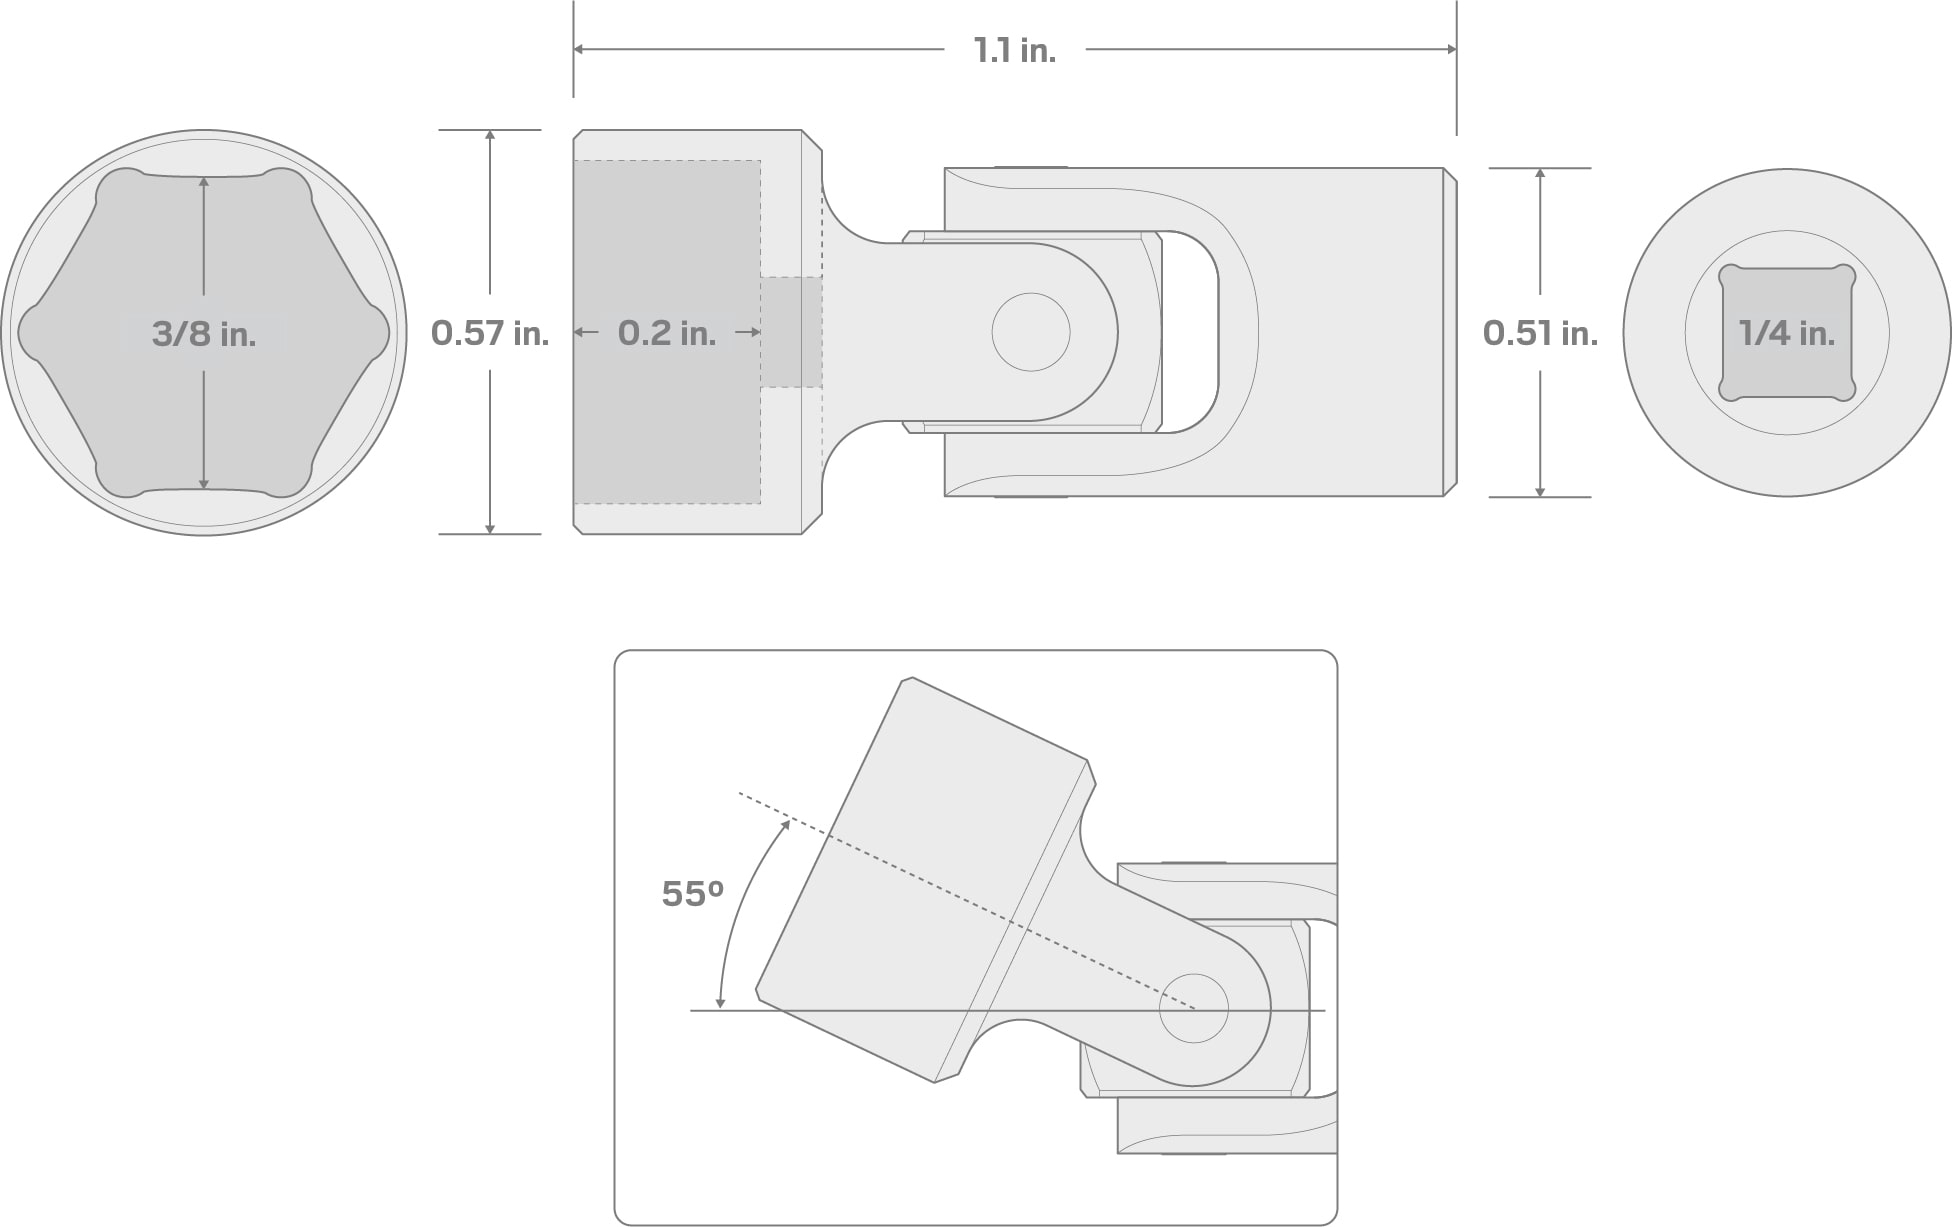 Specs for 1/4 Inch Drive x 3/8 Inch Universal Joint Socket